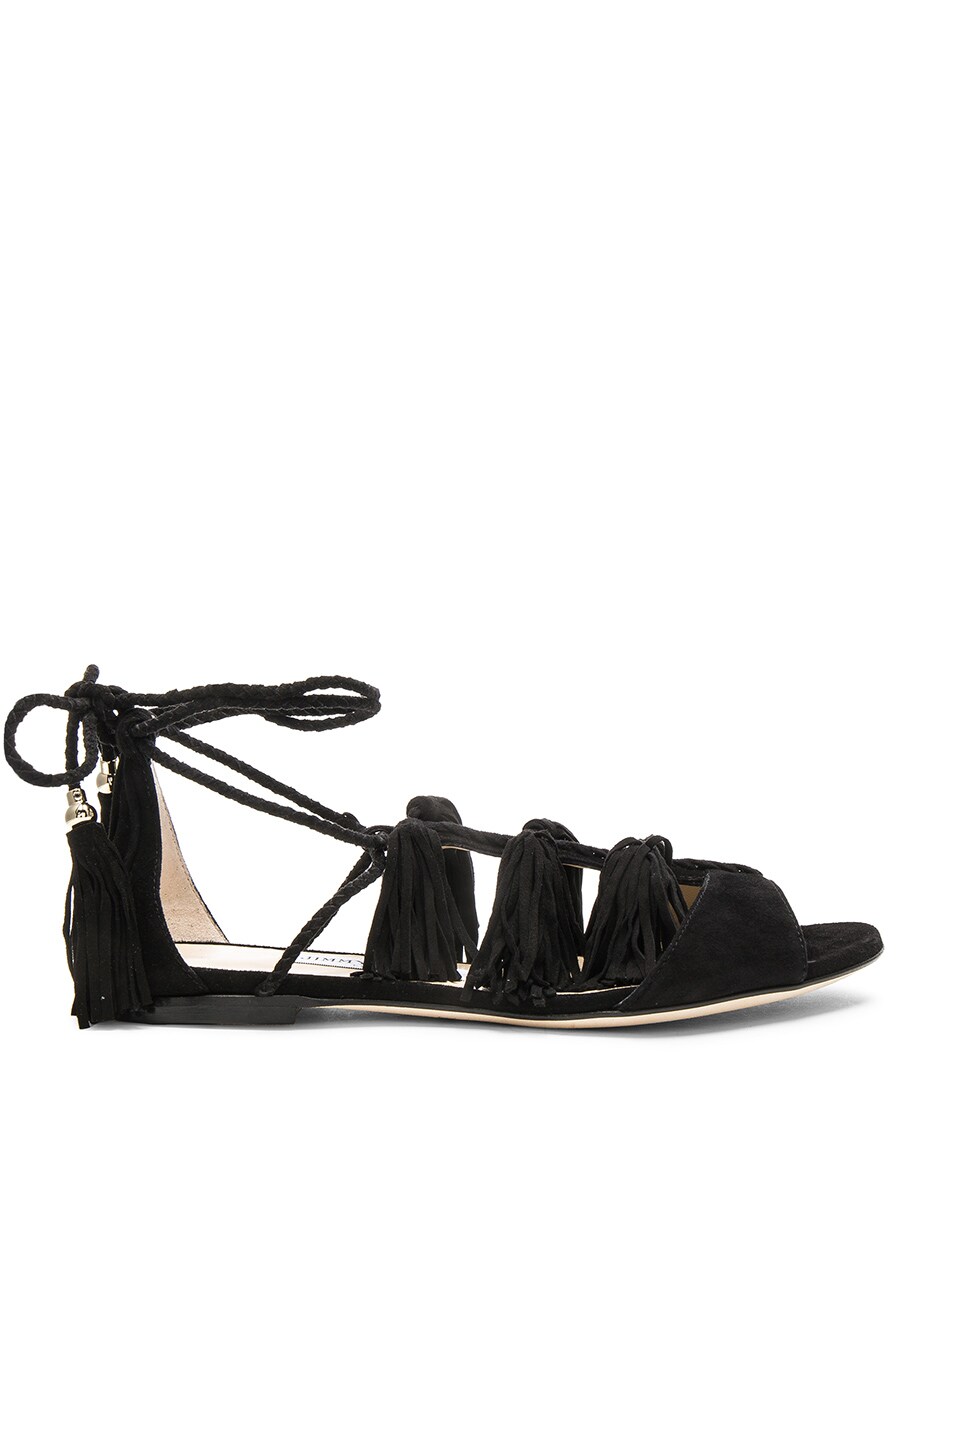 Image 1 of Jimmy Choo Suede Mindy Sandals in Black